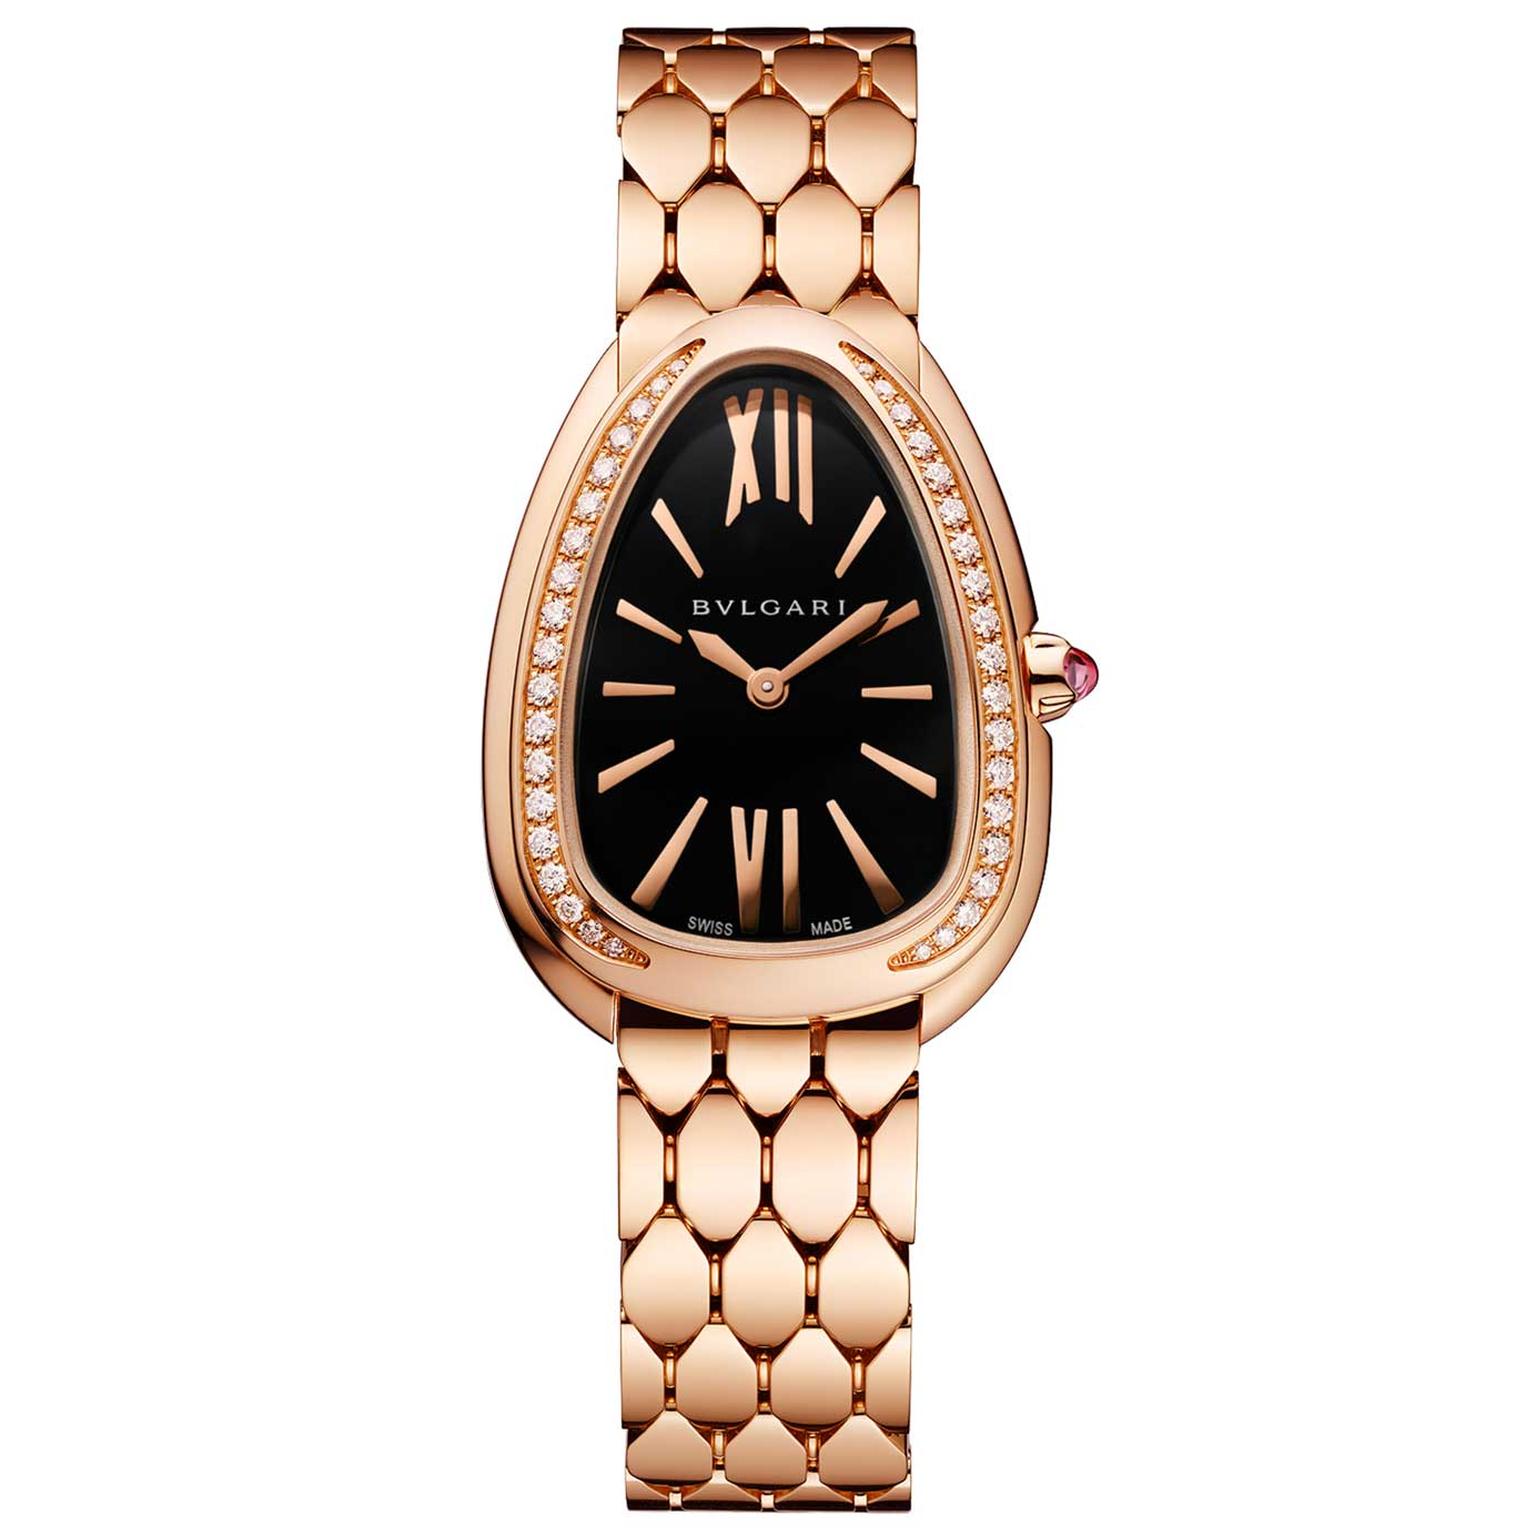 Buy the latest luxury watches from Bulgari now!